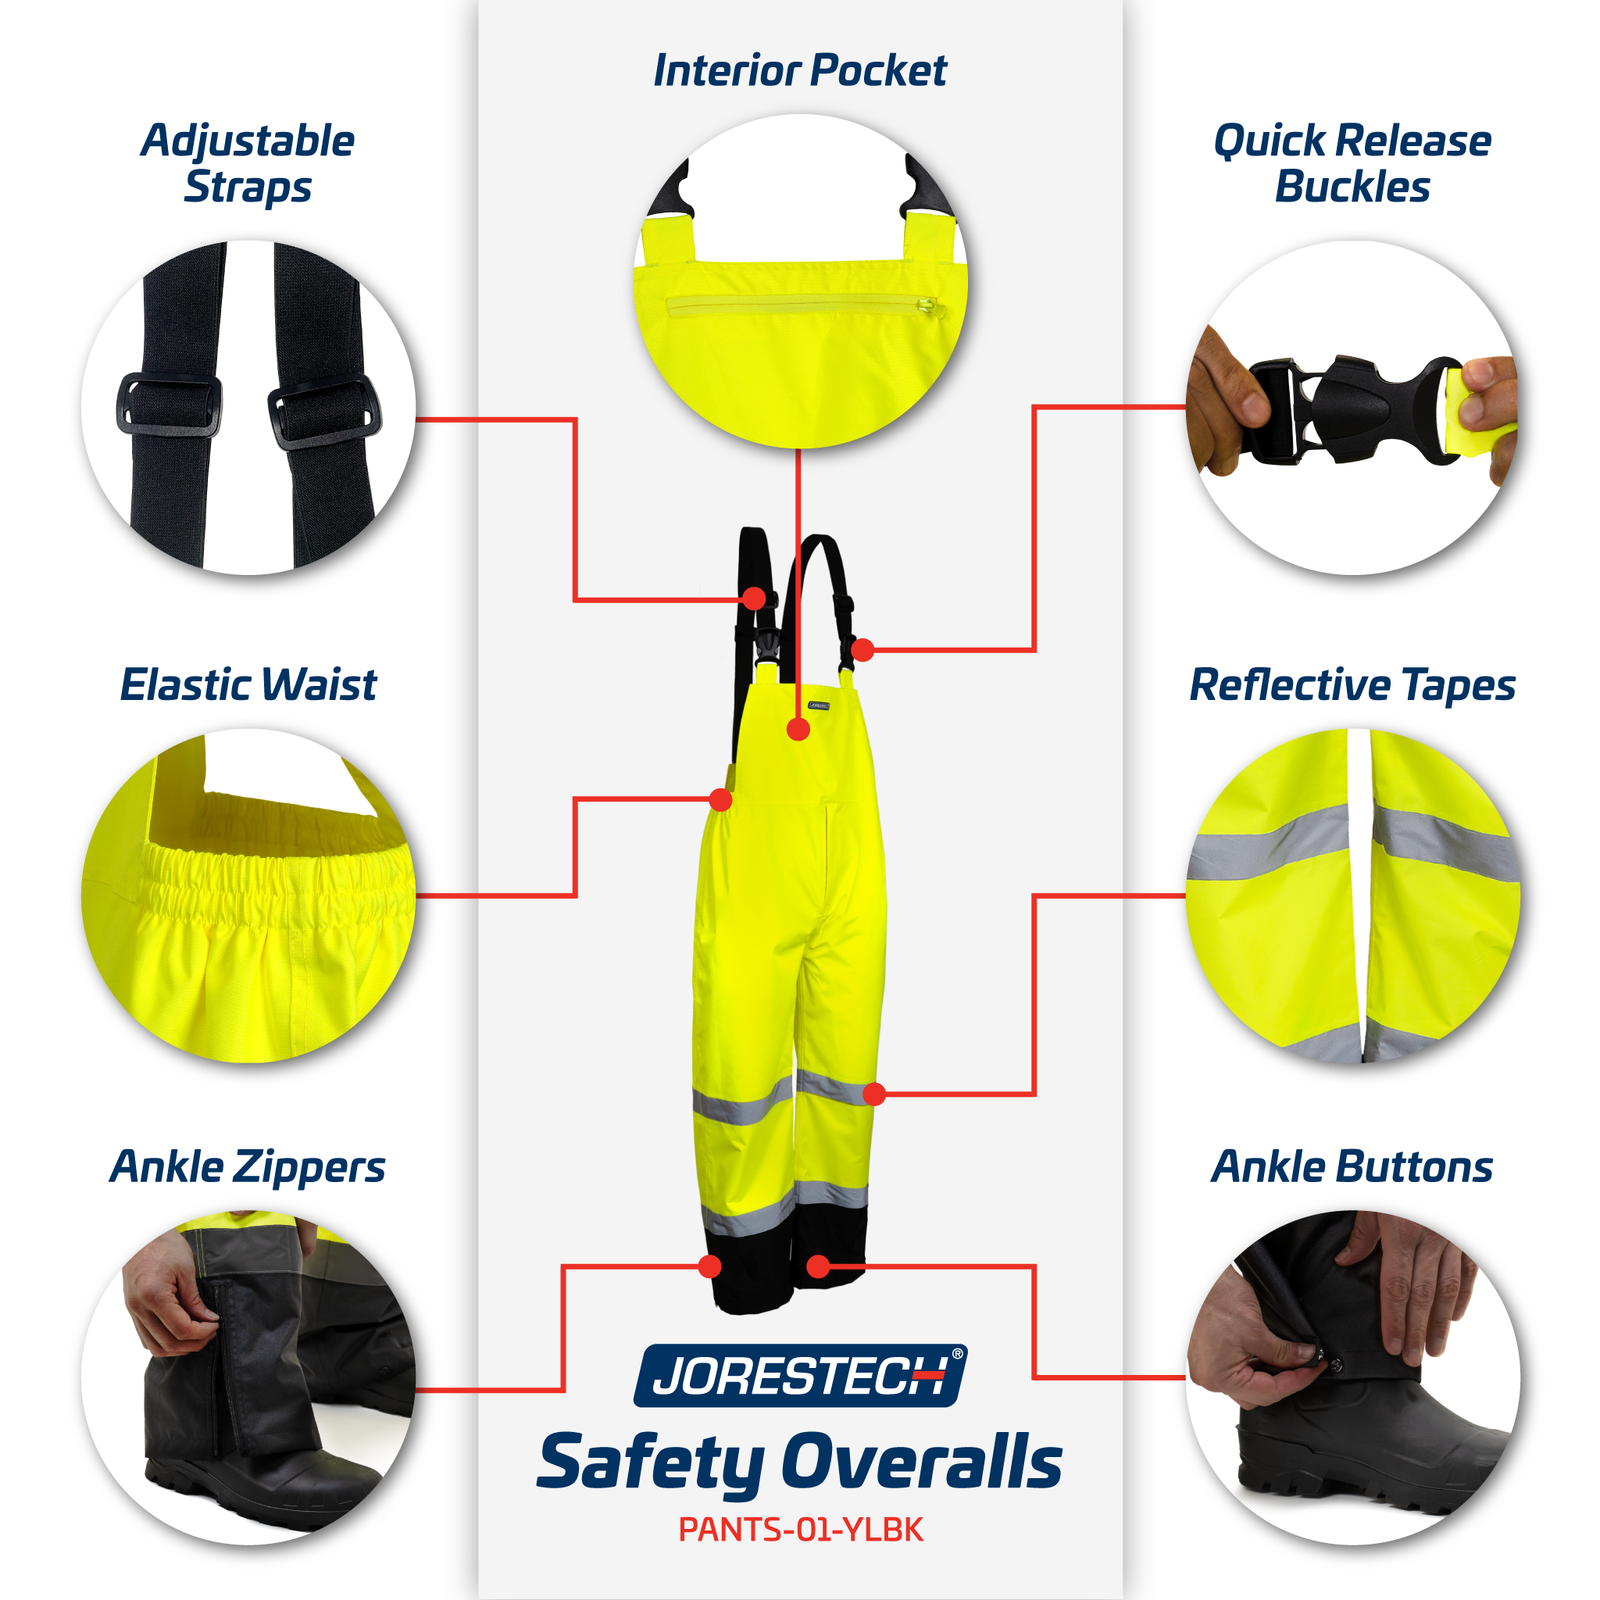 Banner describing the features of the safety overall pants: Adjustable shoulder straps, interior pocket, quick release buckles, elastic waist, reflective tapes, ankle zippers,, ankle buttons